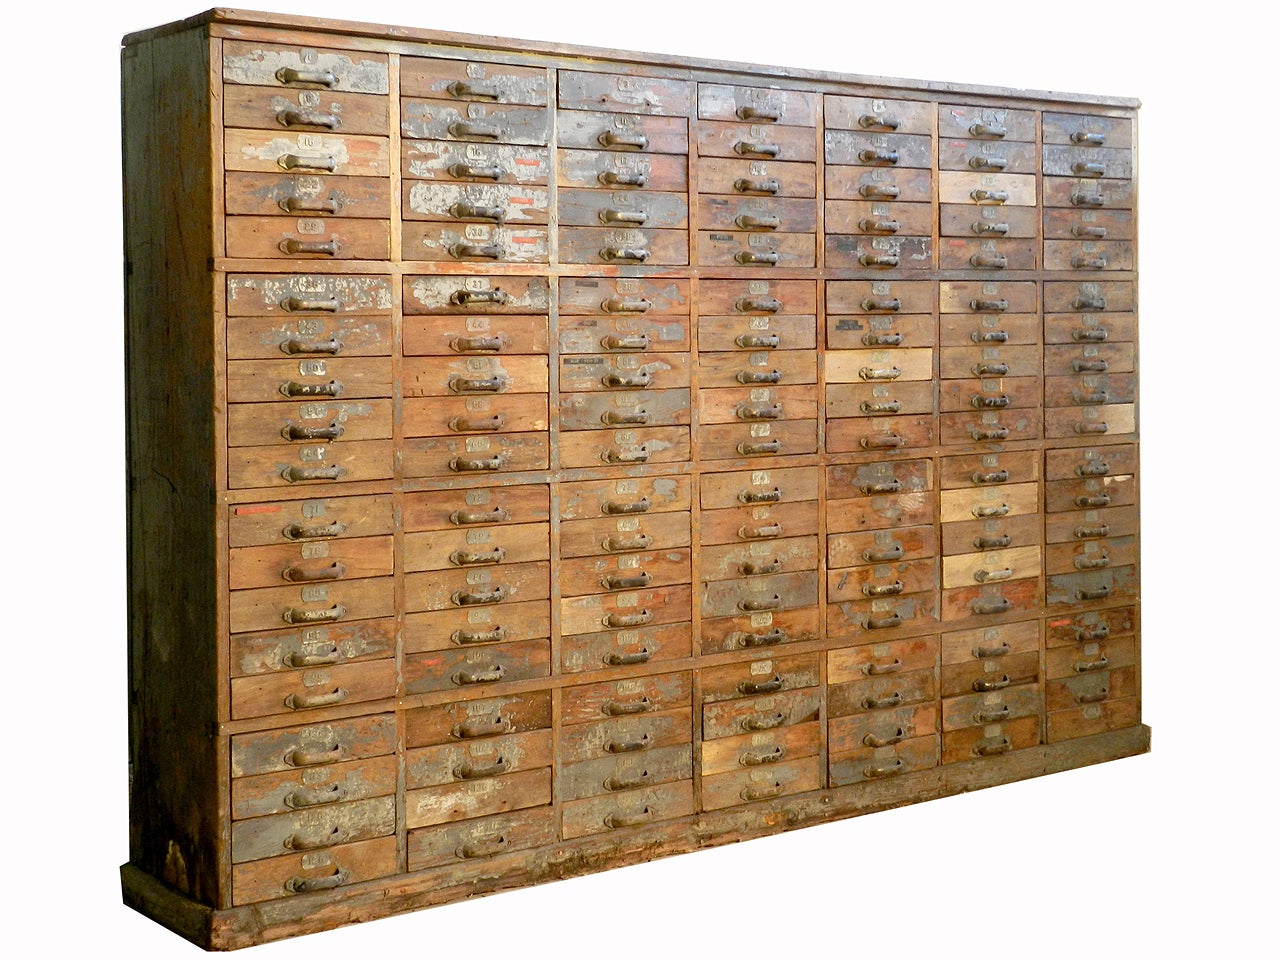 1800s Wall of Draws